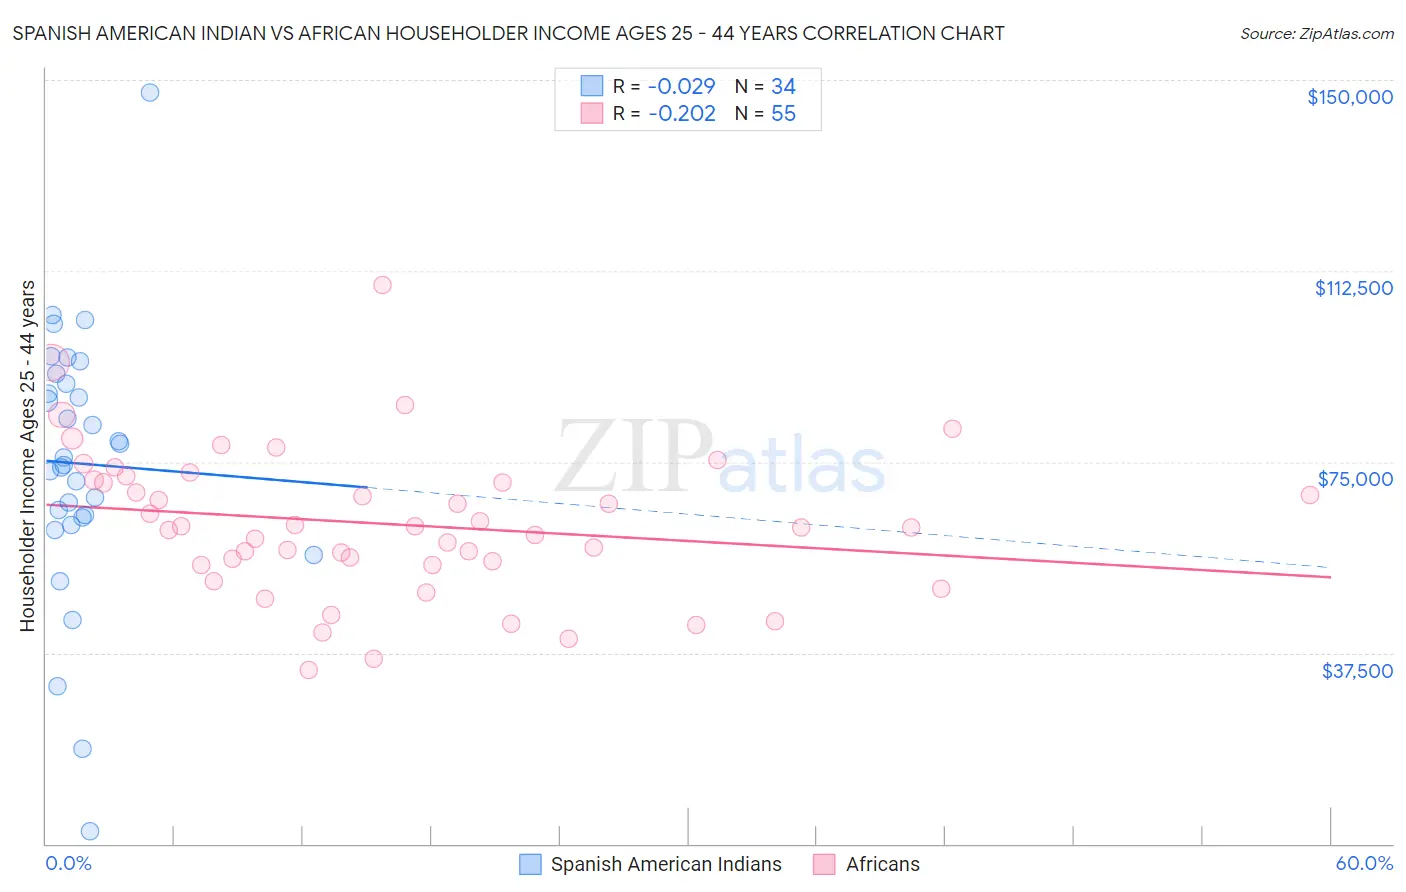 Spanish American Indian vs African Householder Income Ages 25 - 44 years